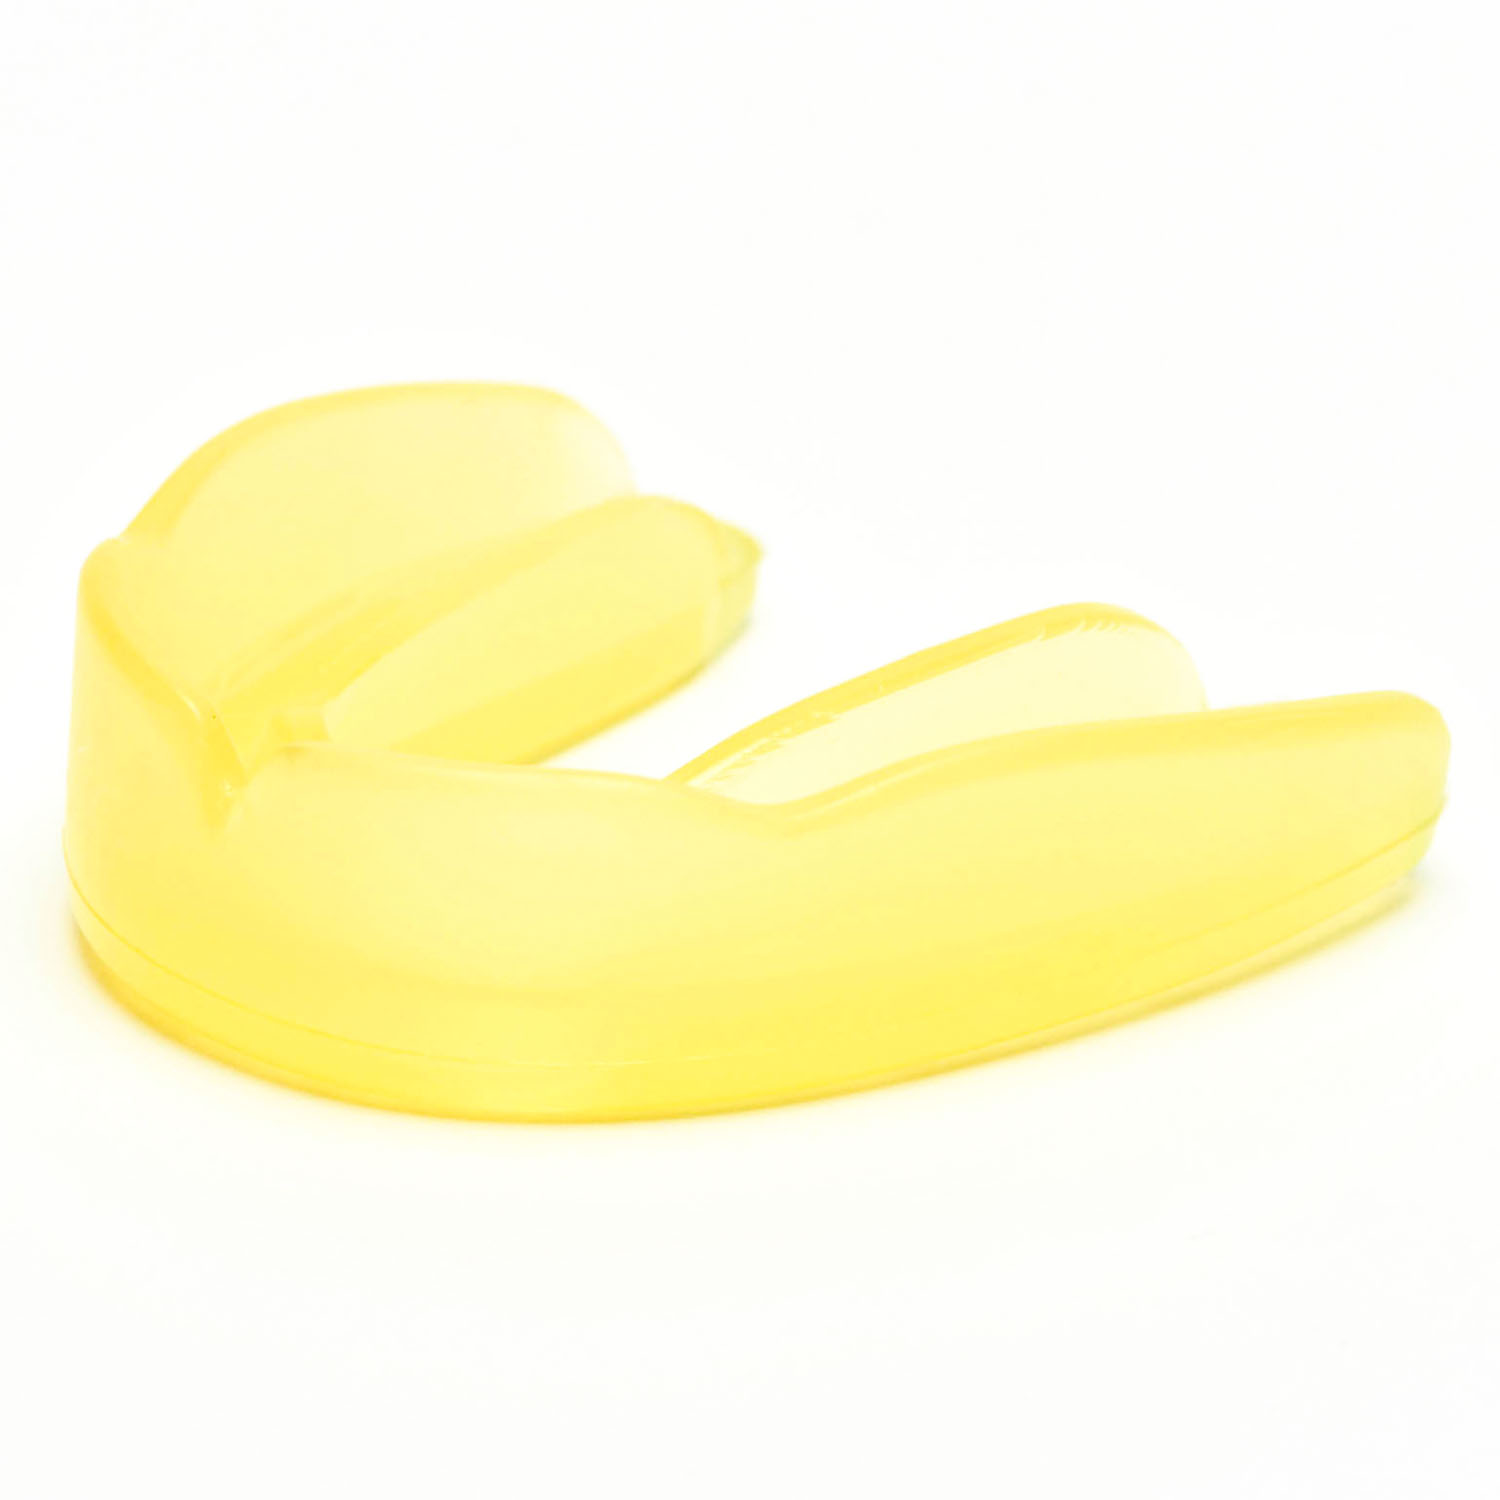 LEONE Mouth Guard, Basic, PD521, gelb